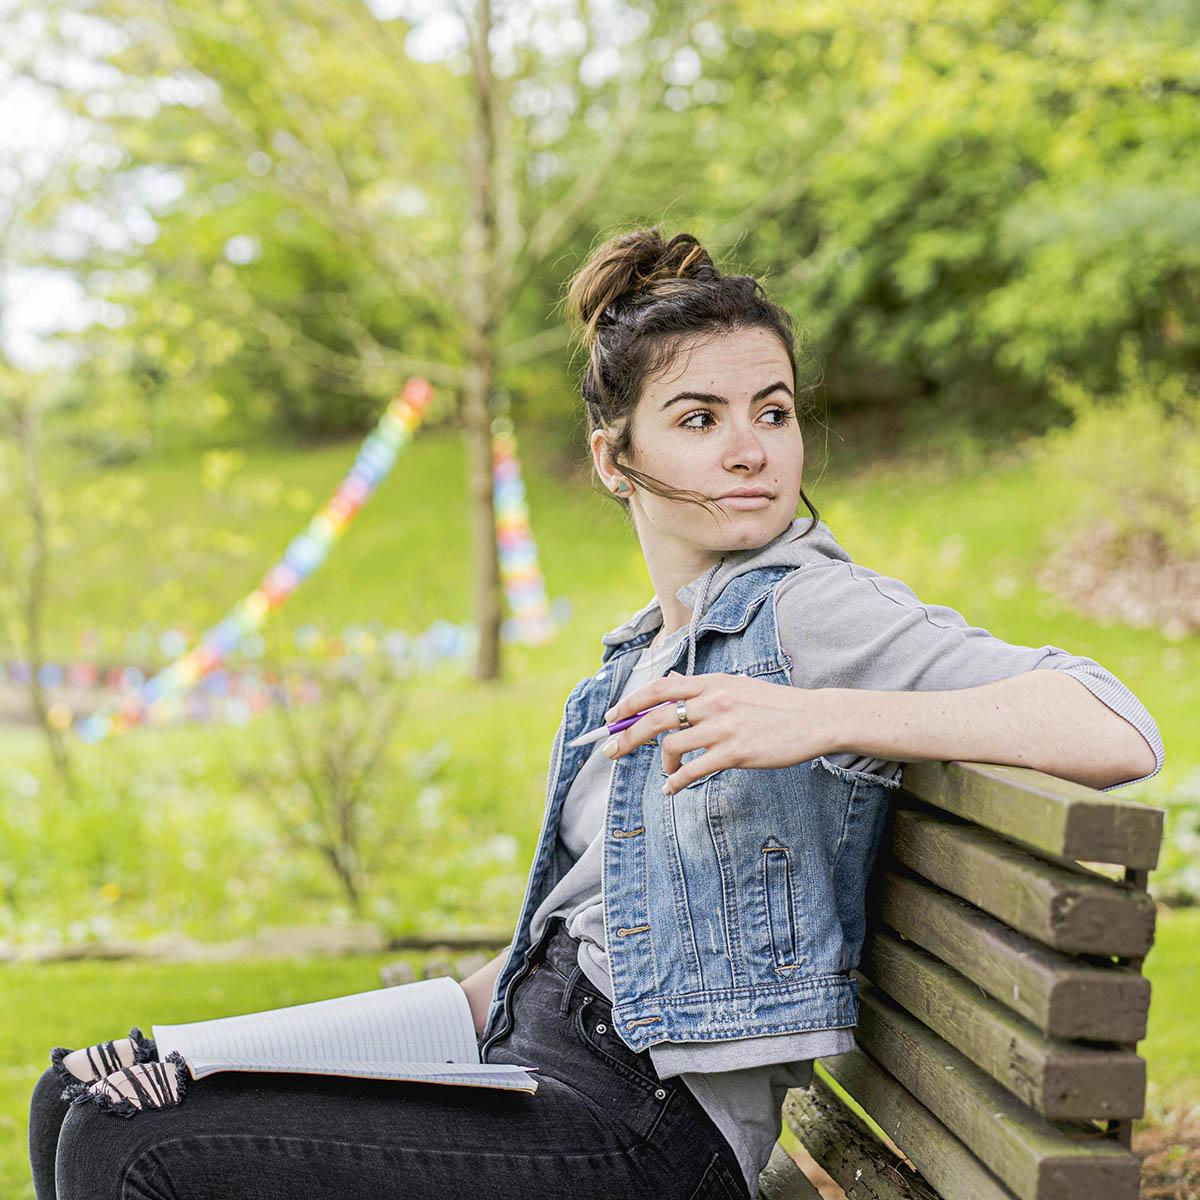 Photo of a young white woman with hair tied up, wearing a jean jacket and seated on a bench outside looking behind her into the distance